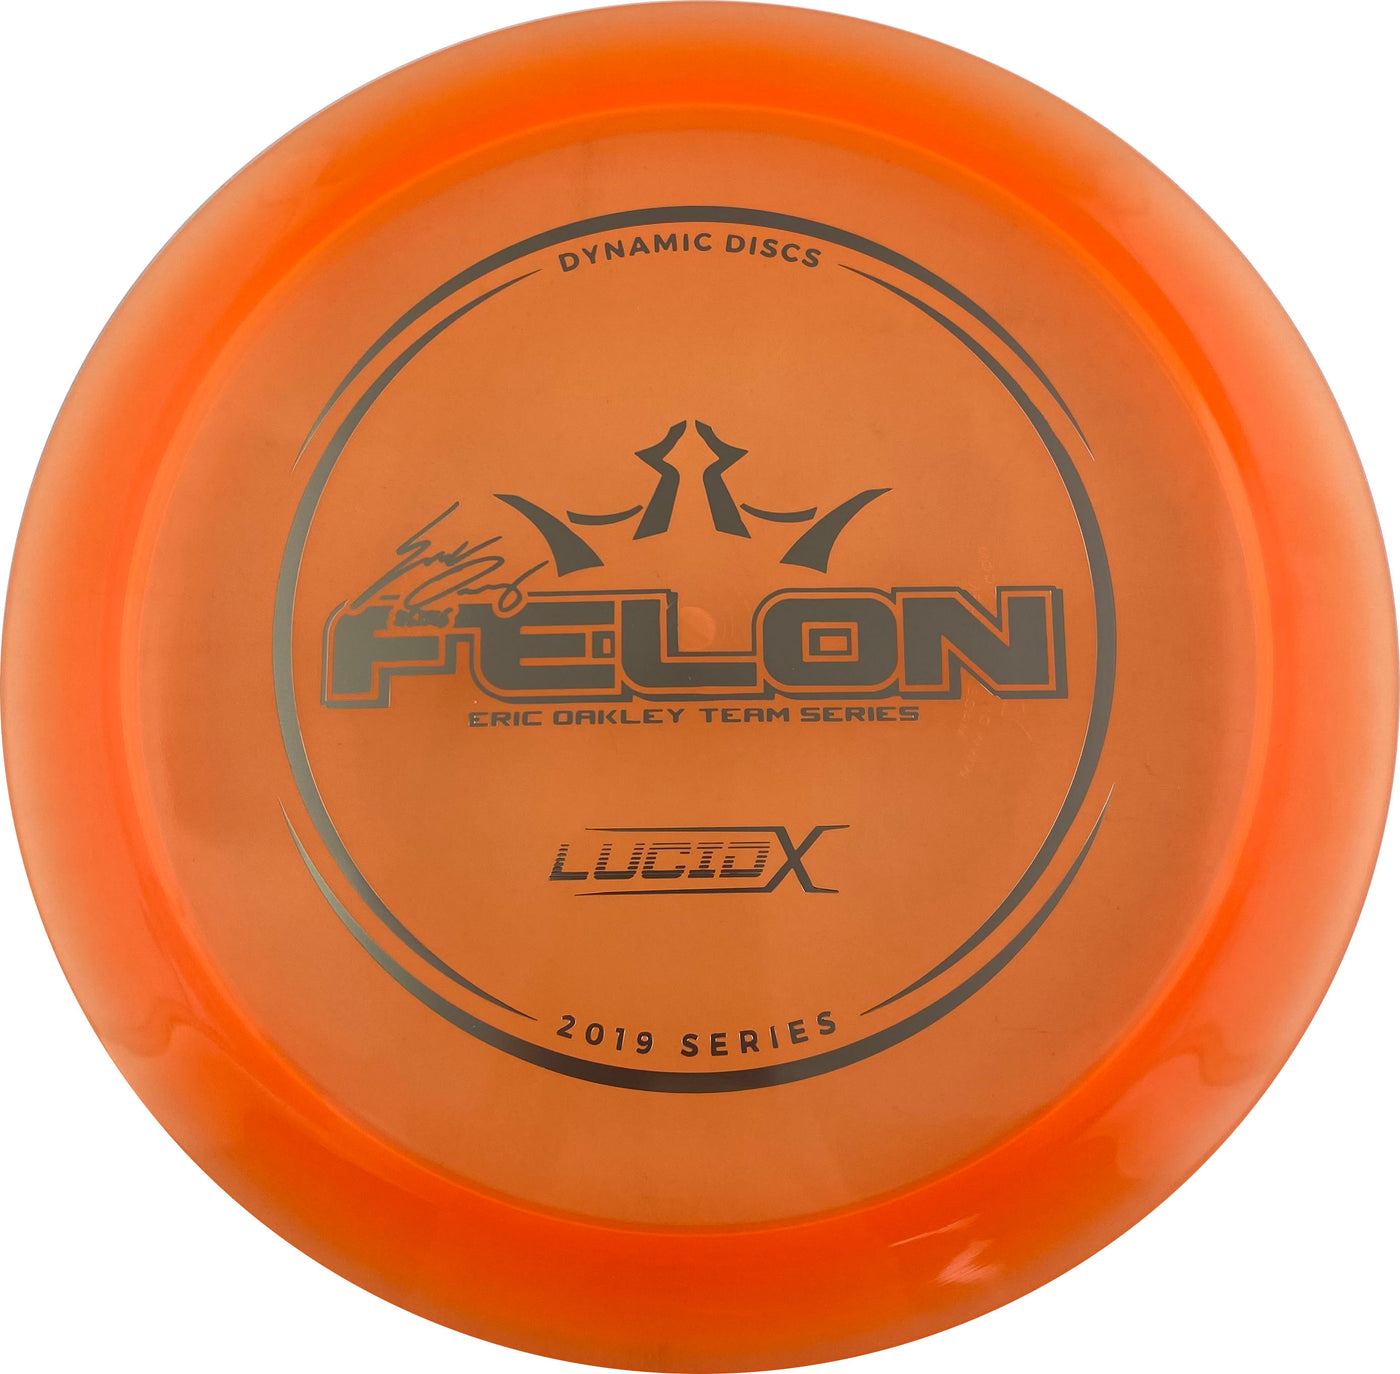 Dynamic Discs Lucid-X Felon Fairway Driver with Eric Oakley 2019 Team Series Stamp - Speed 9